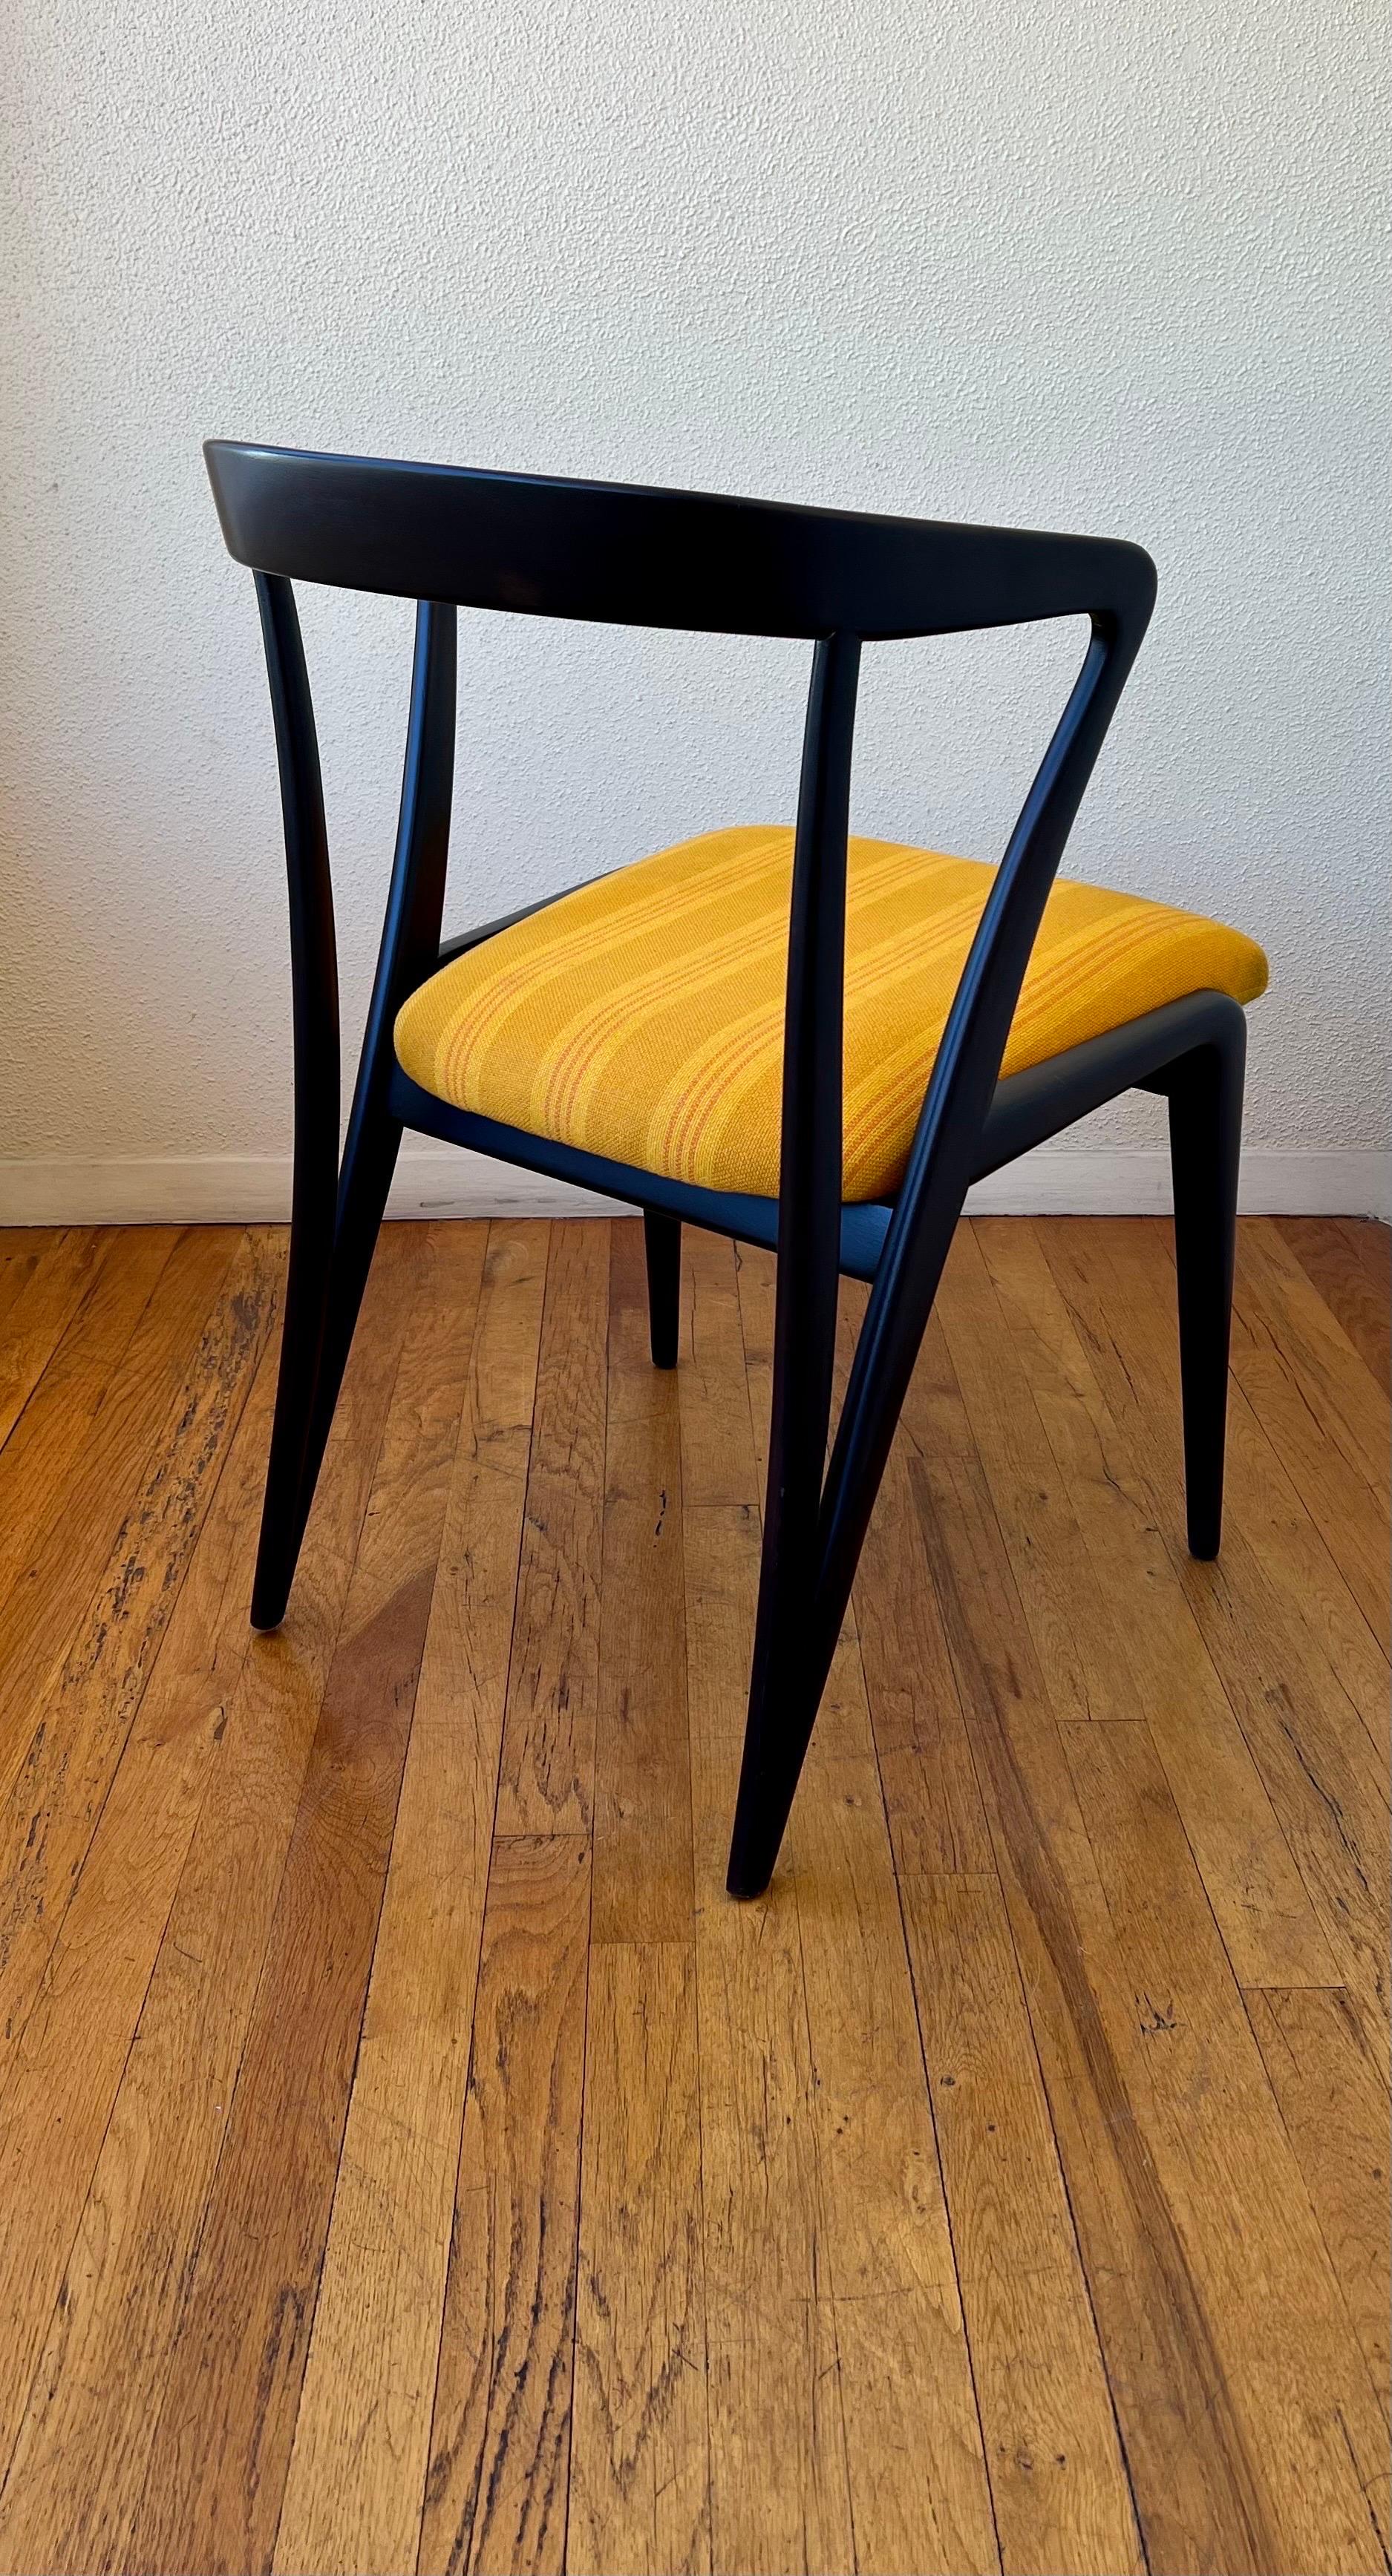 Beautiful and elegant single chair designed by Bertha Schaefer for Singer & Sons, freshly lacquer in charcoal finish color recovered in cloth danish fabric.